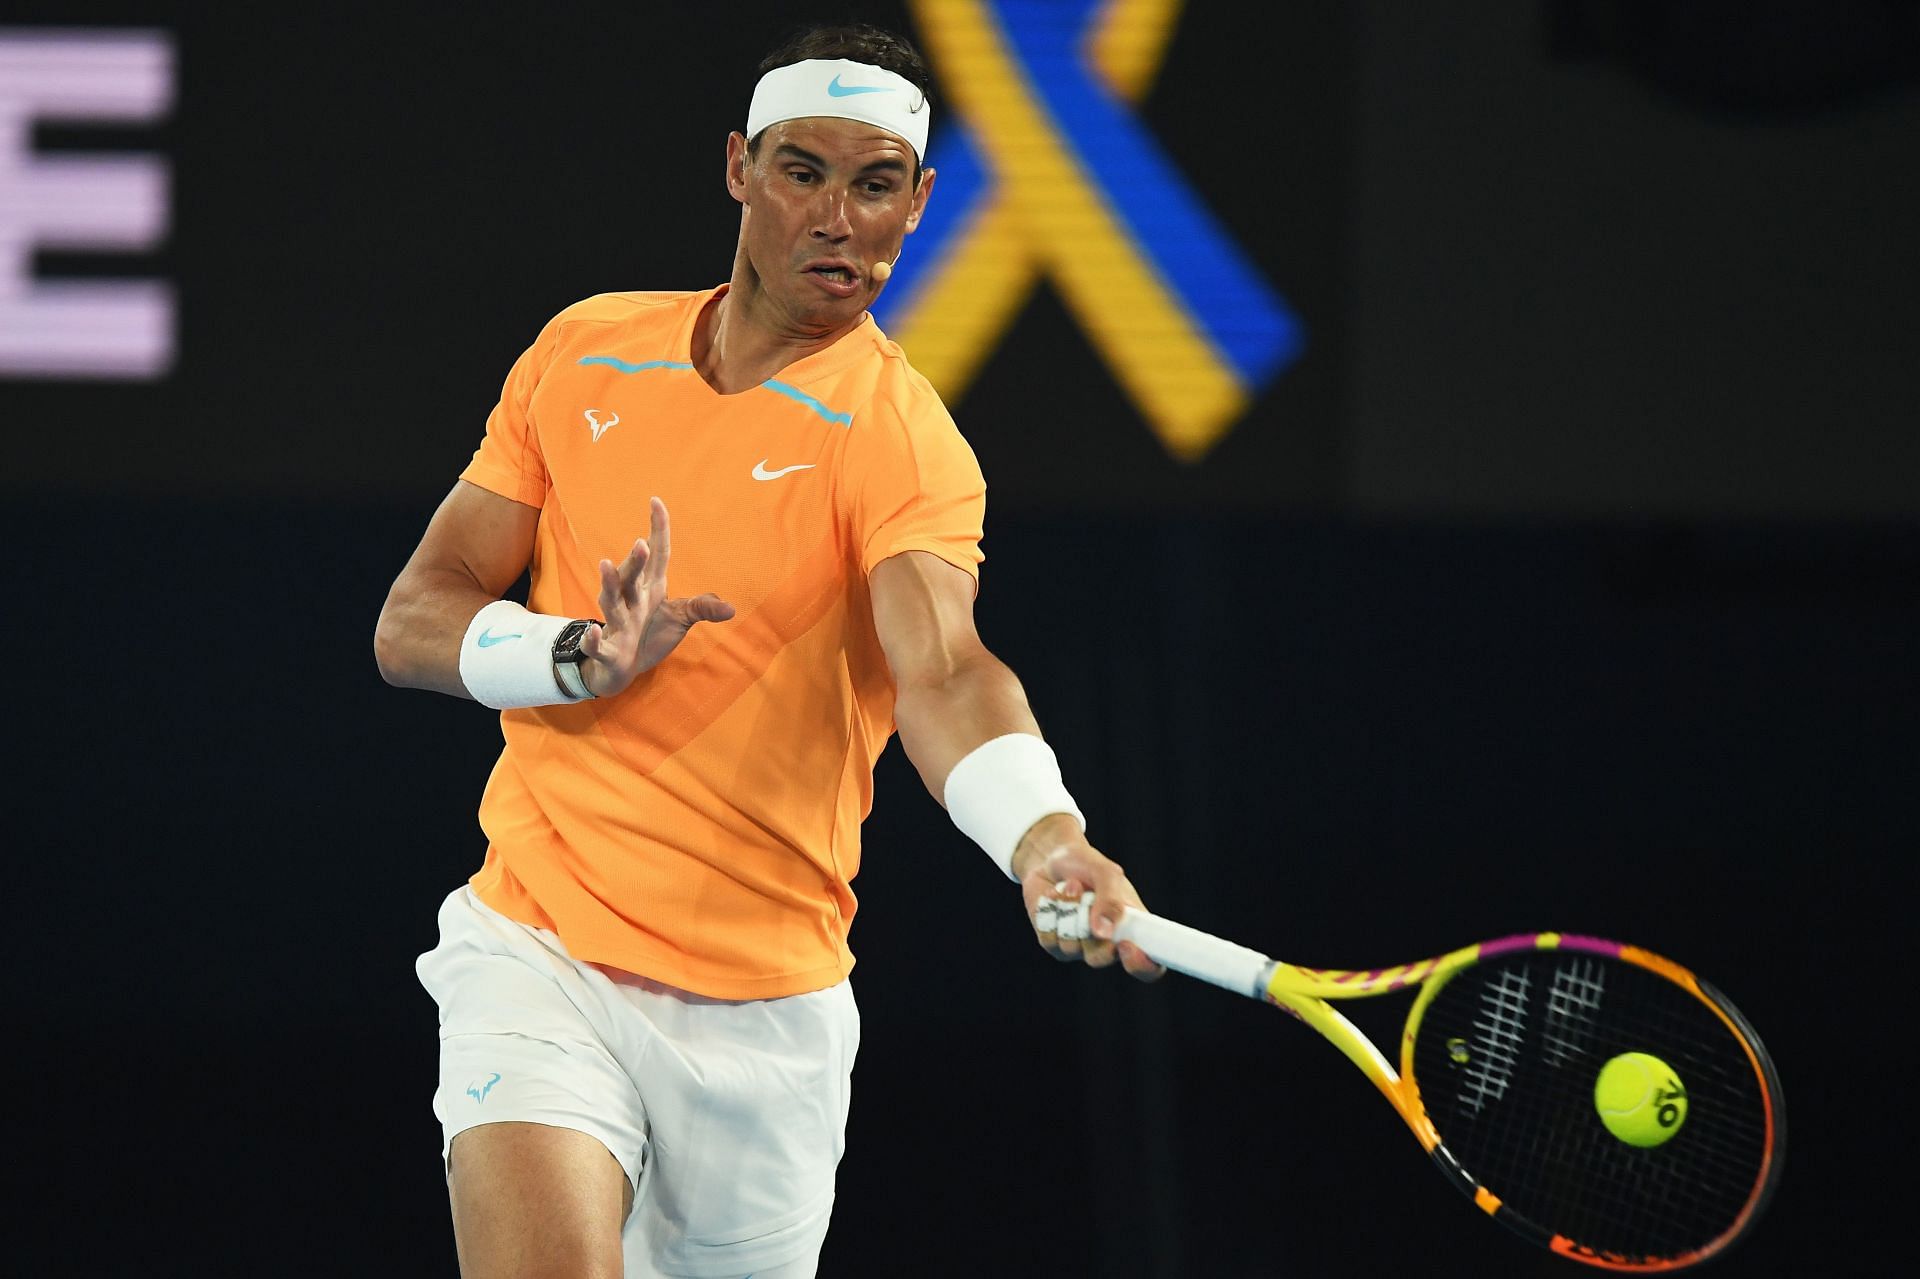 Rafael Nadal is the top seed at the Australian Open